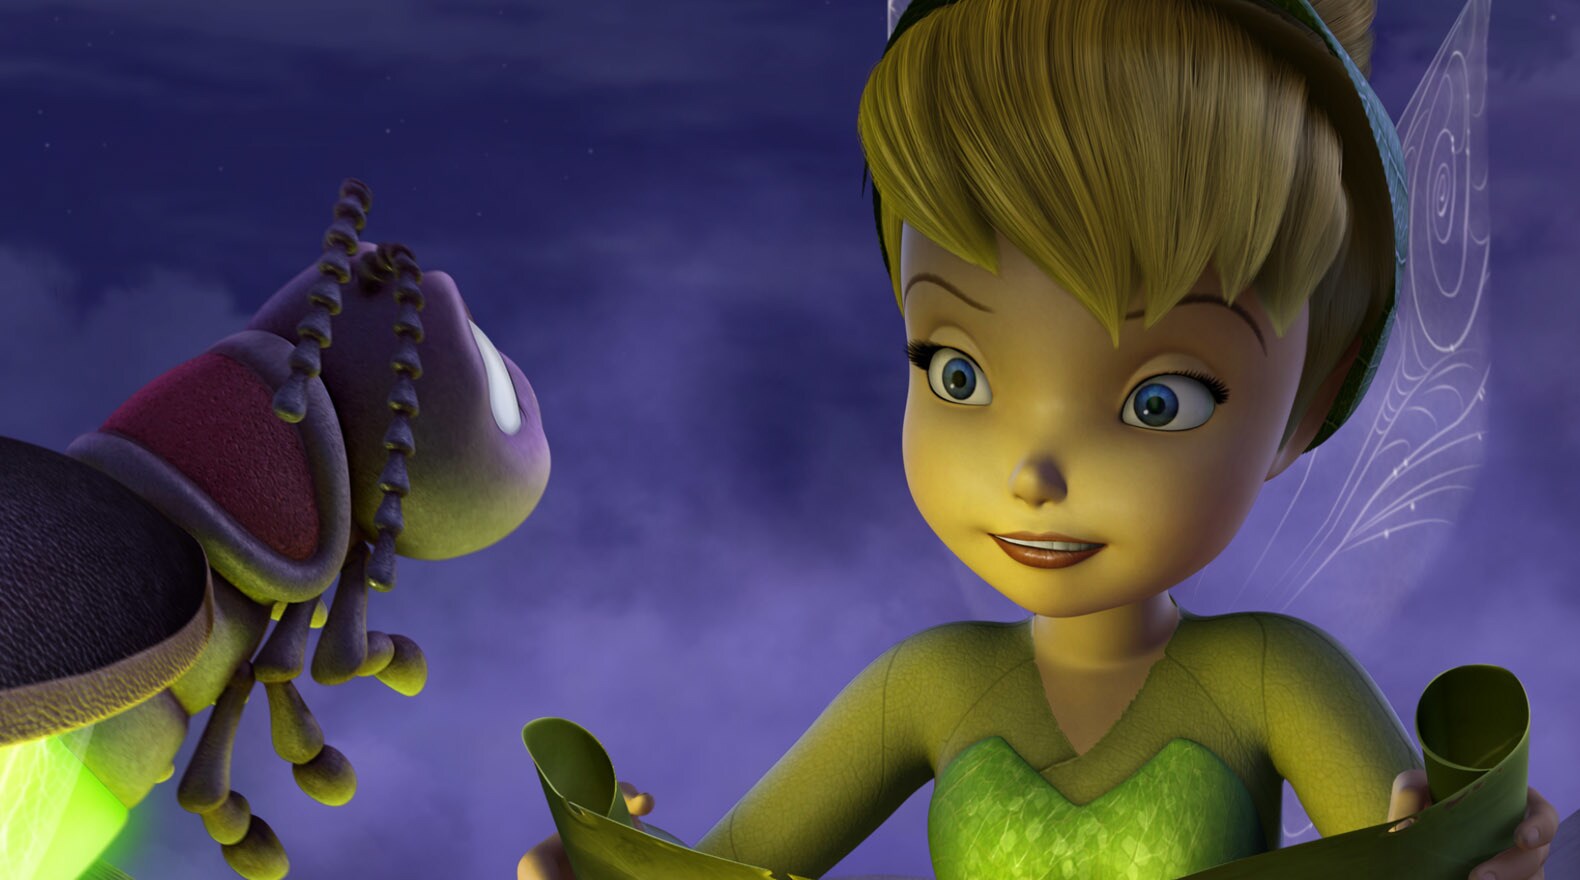 Tink meets firefly Blaze who helps light their journey.